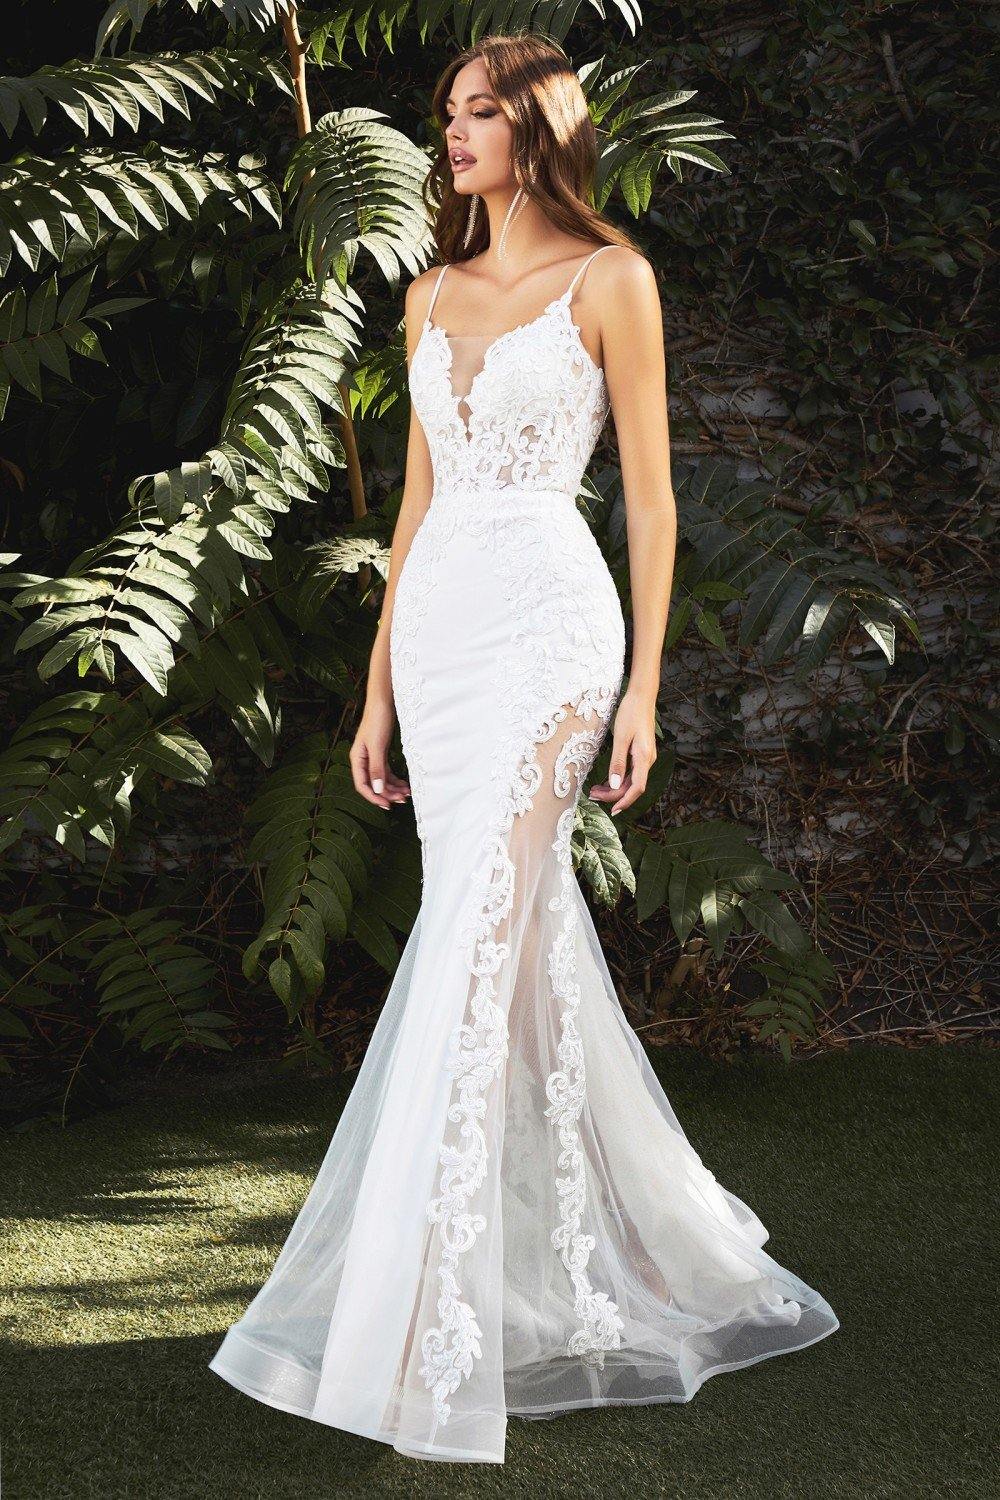 Mermaid Illusion Wedding Dress - The Dress Outlet